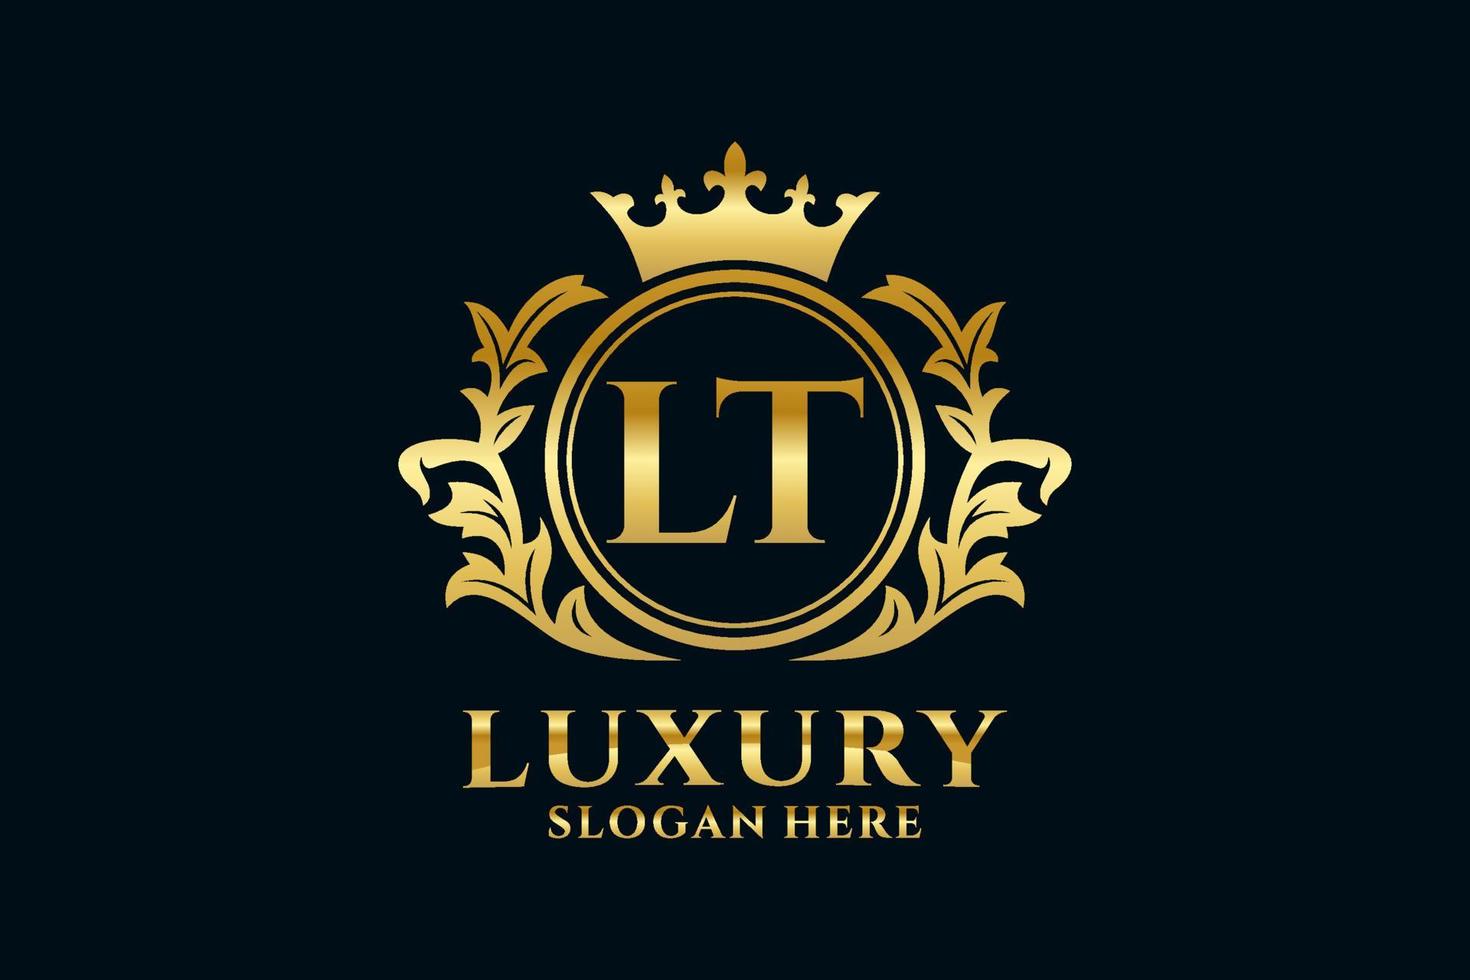 Initial LT Letter Royal Luxury Logo template in vector art for luxurious branding projects and other vector illustration.